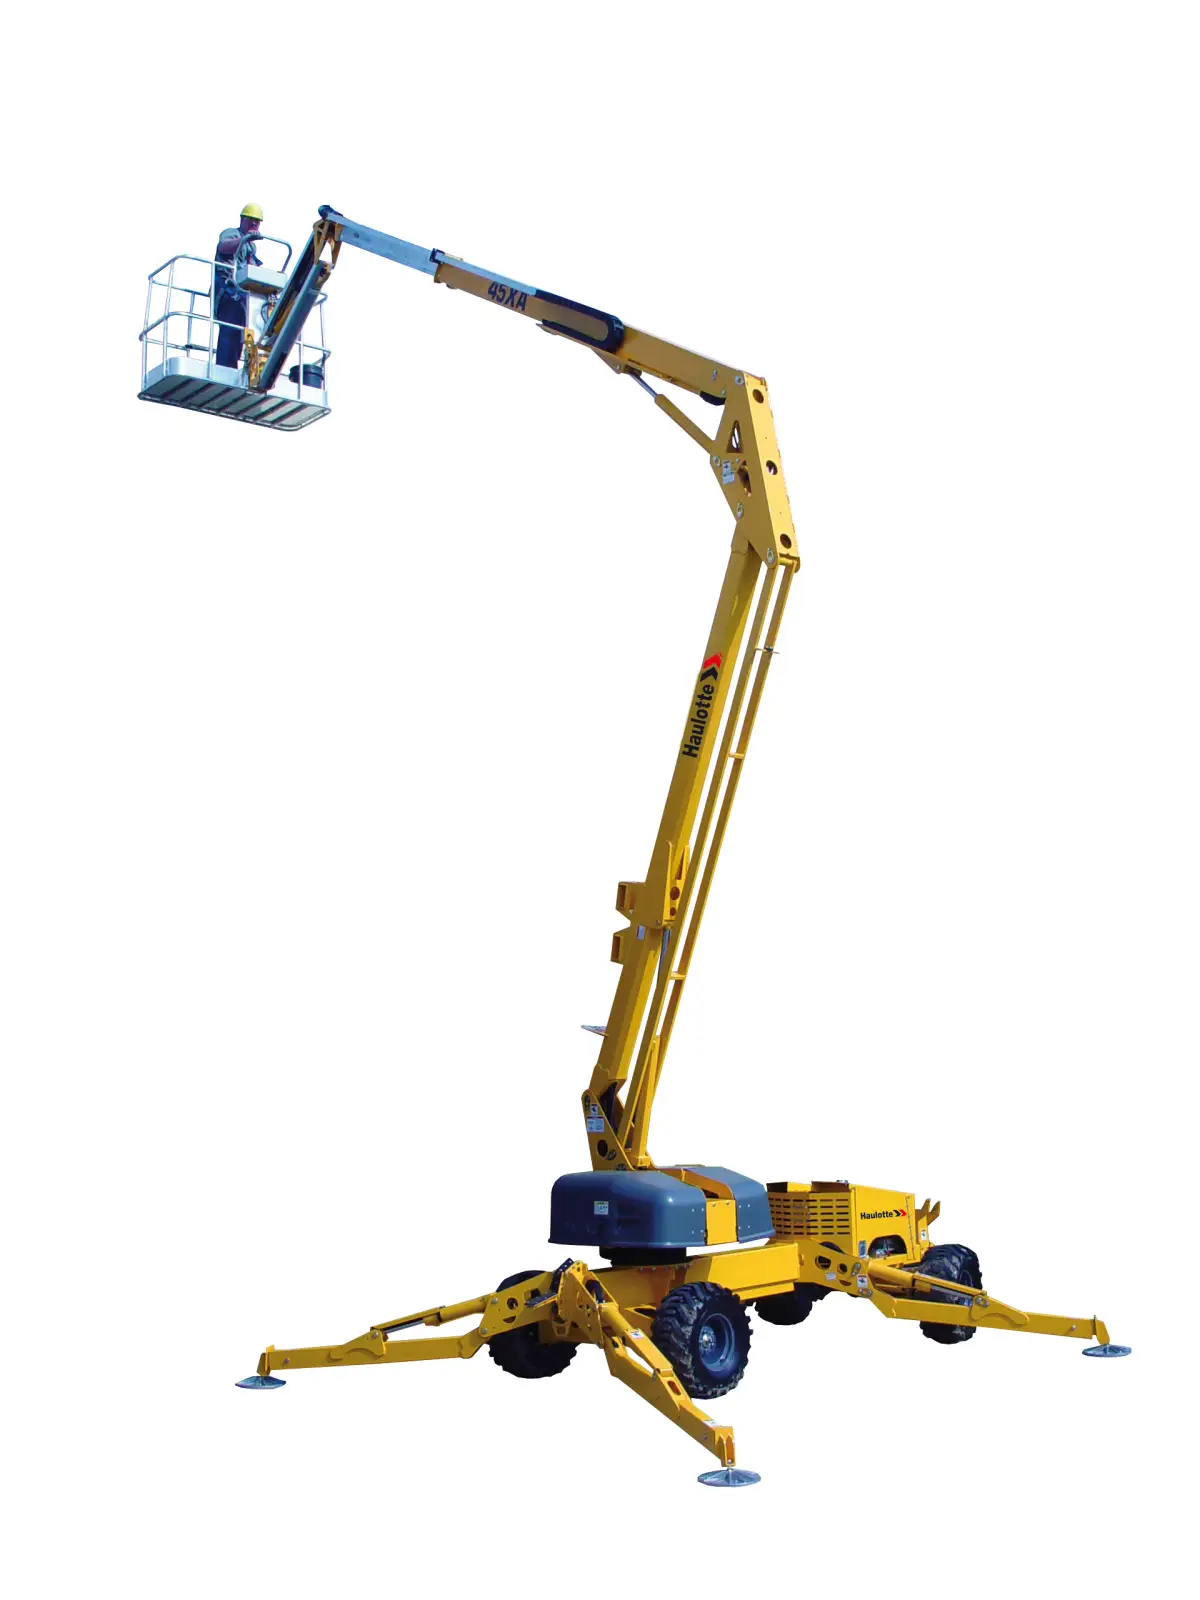 drivable bucket lift rental from bledsoe rentals